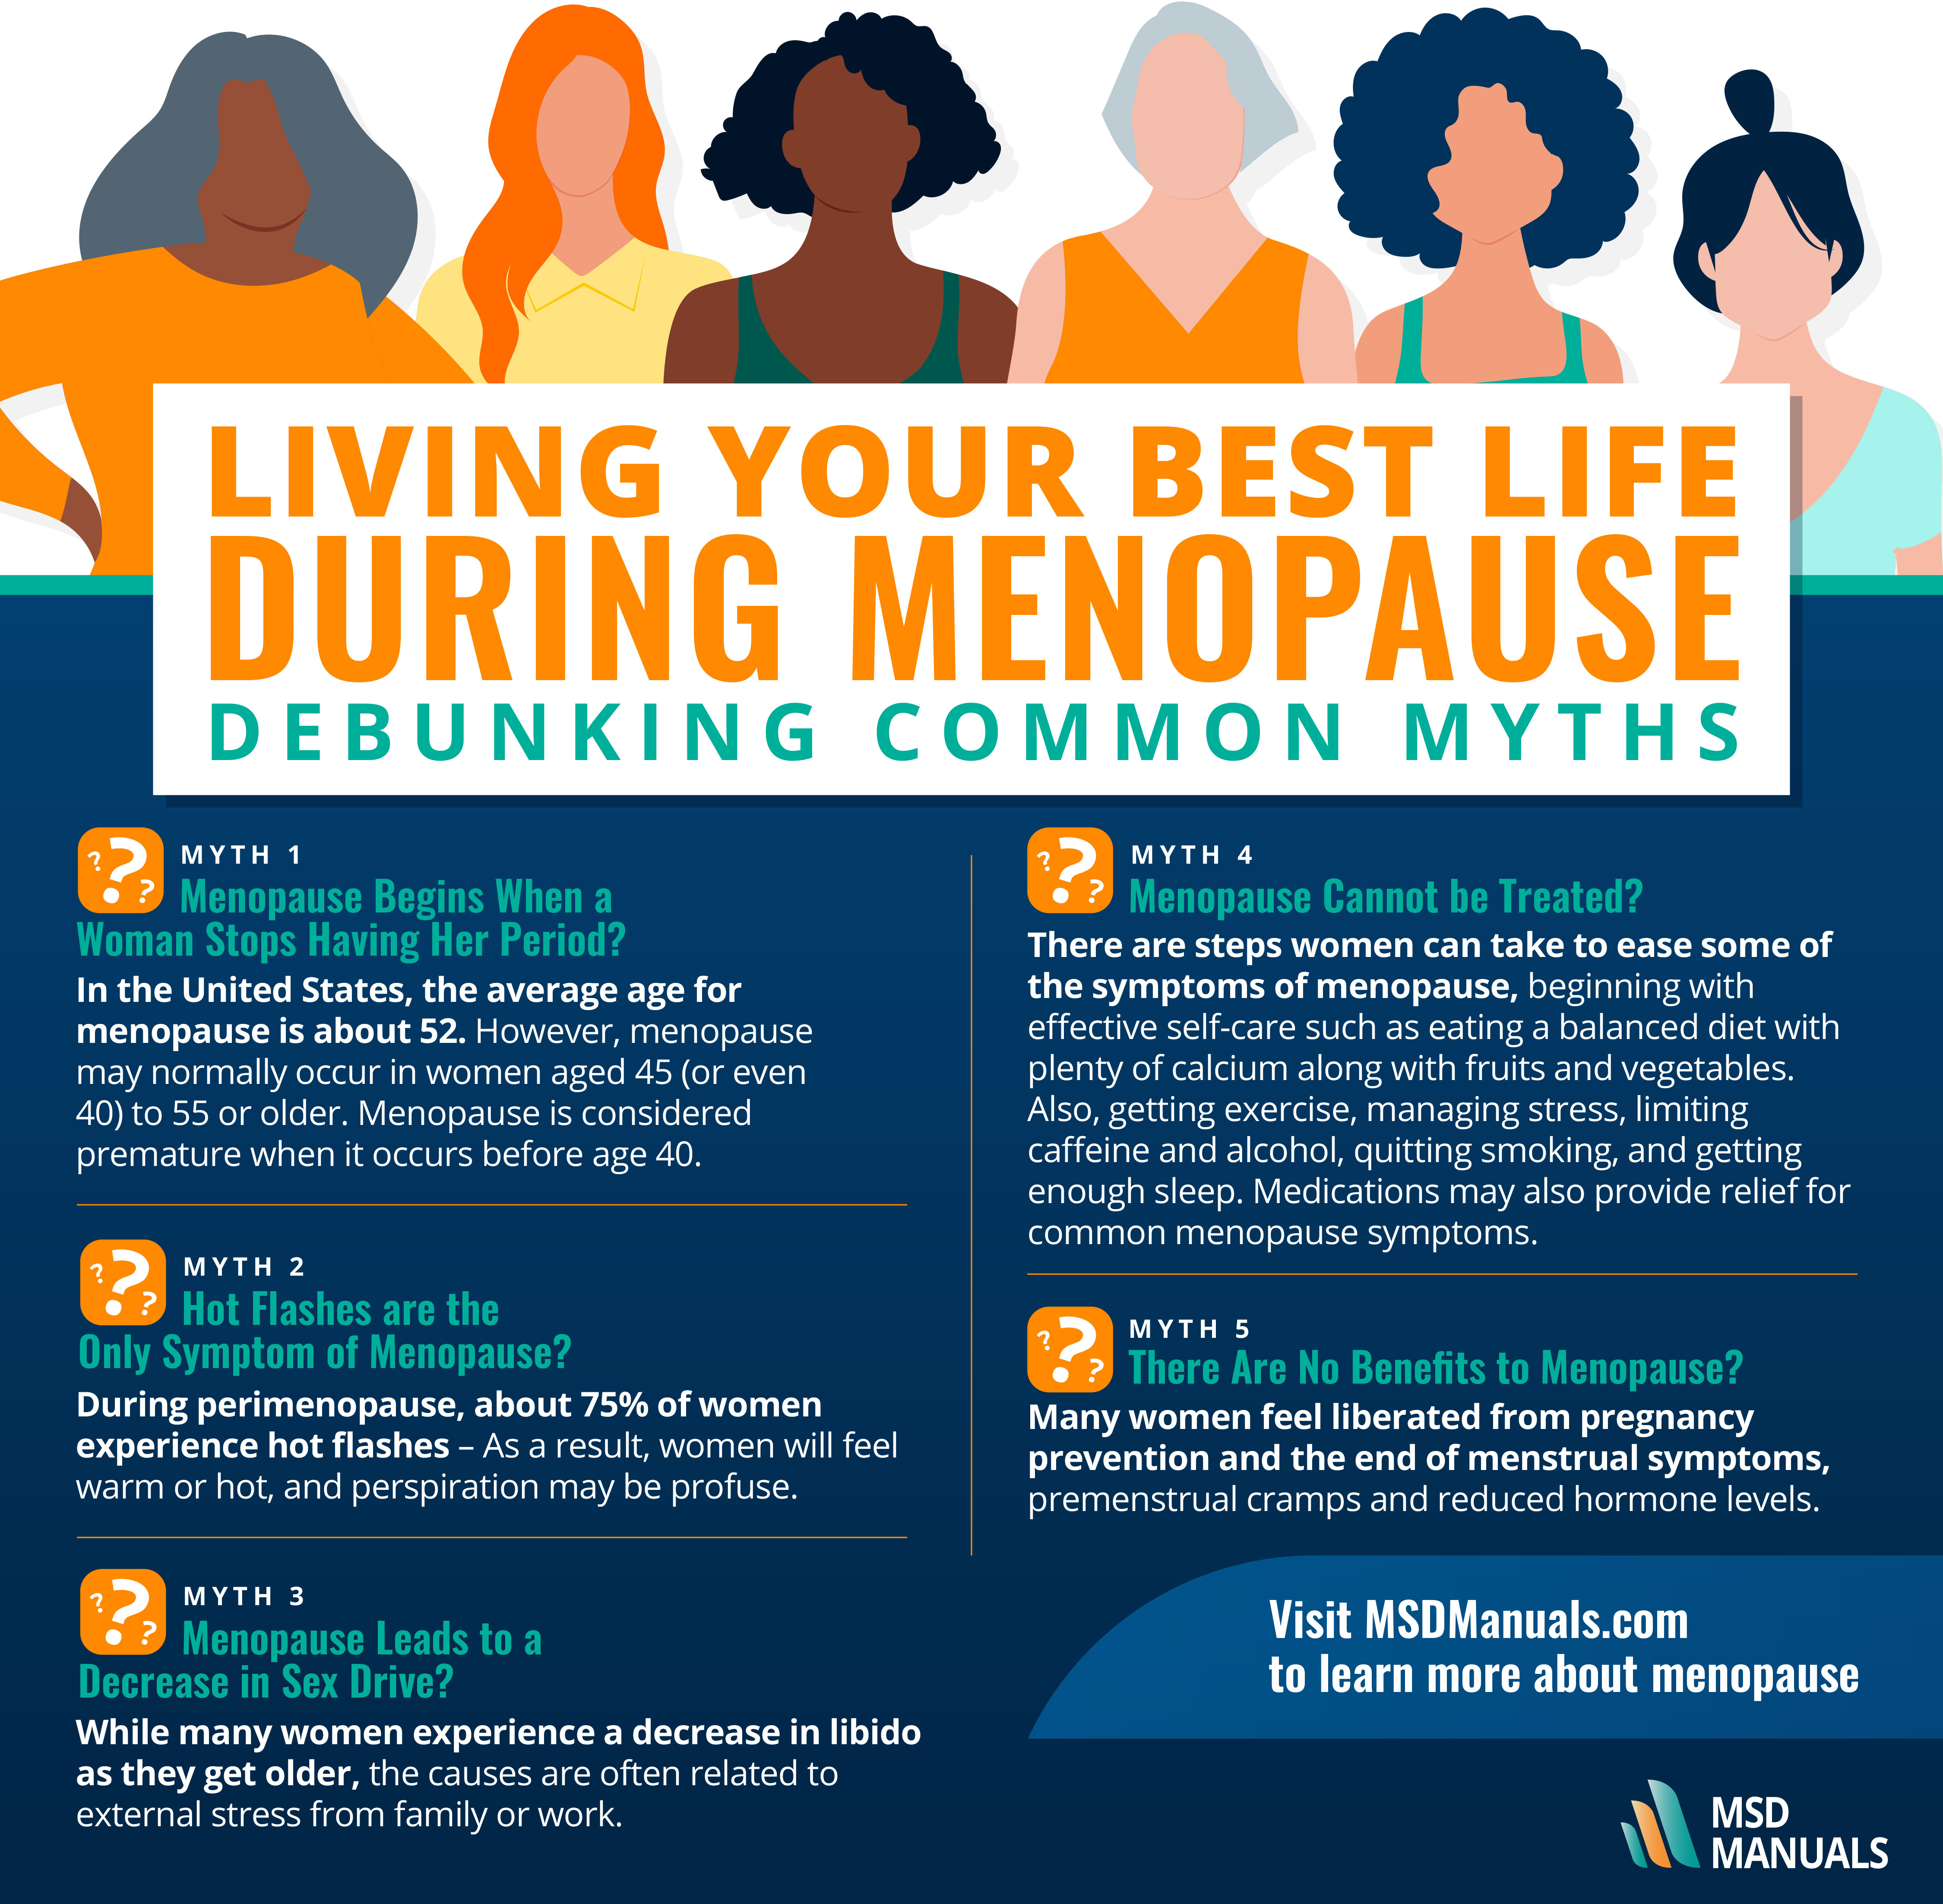 Debunking The Most Common Menopause Myths - MSD Manual Consumer Version